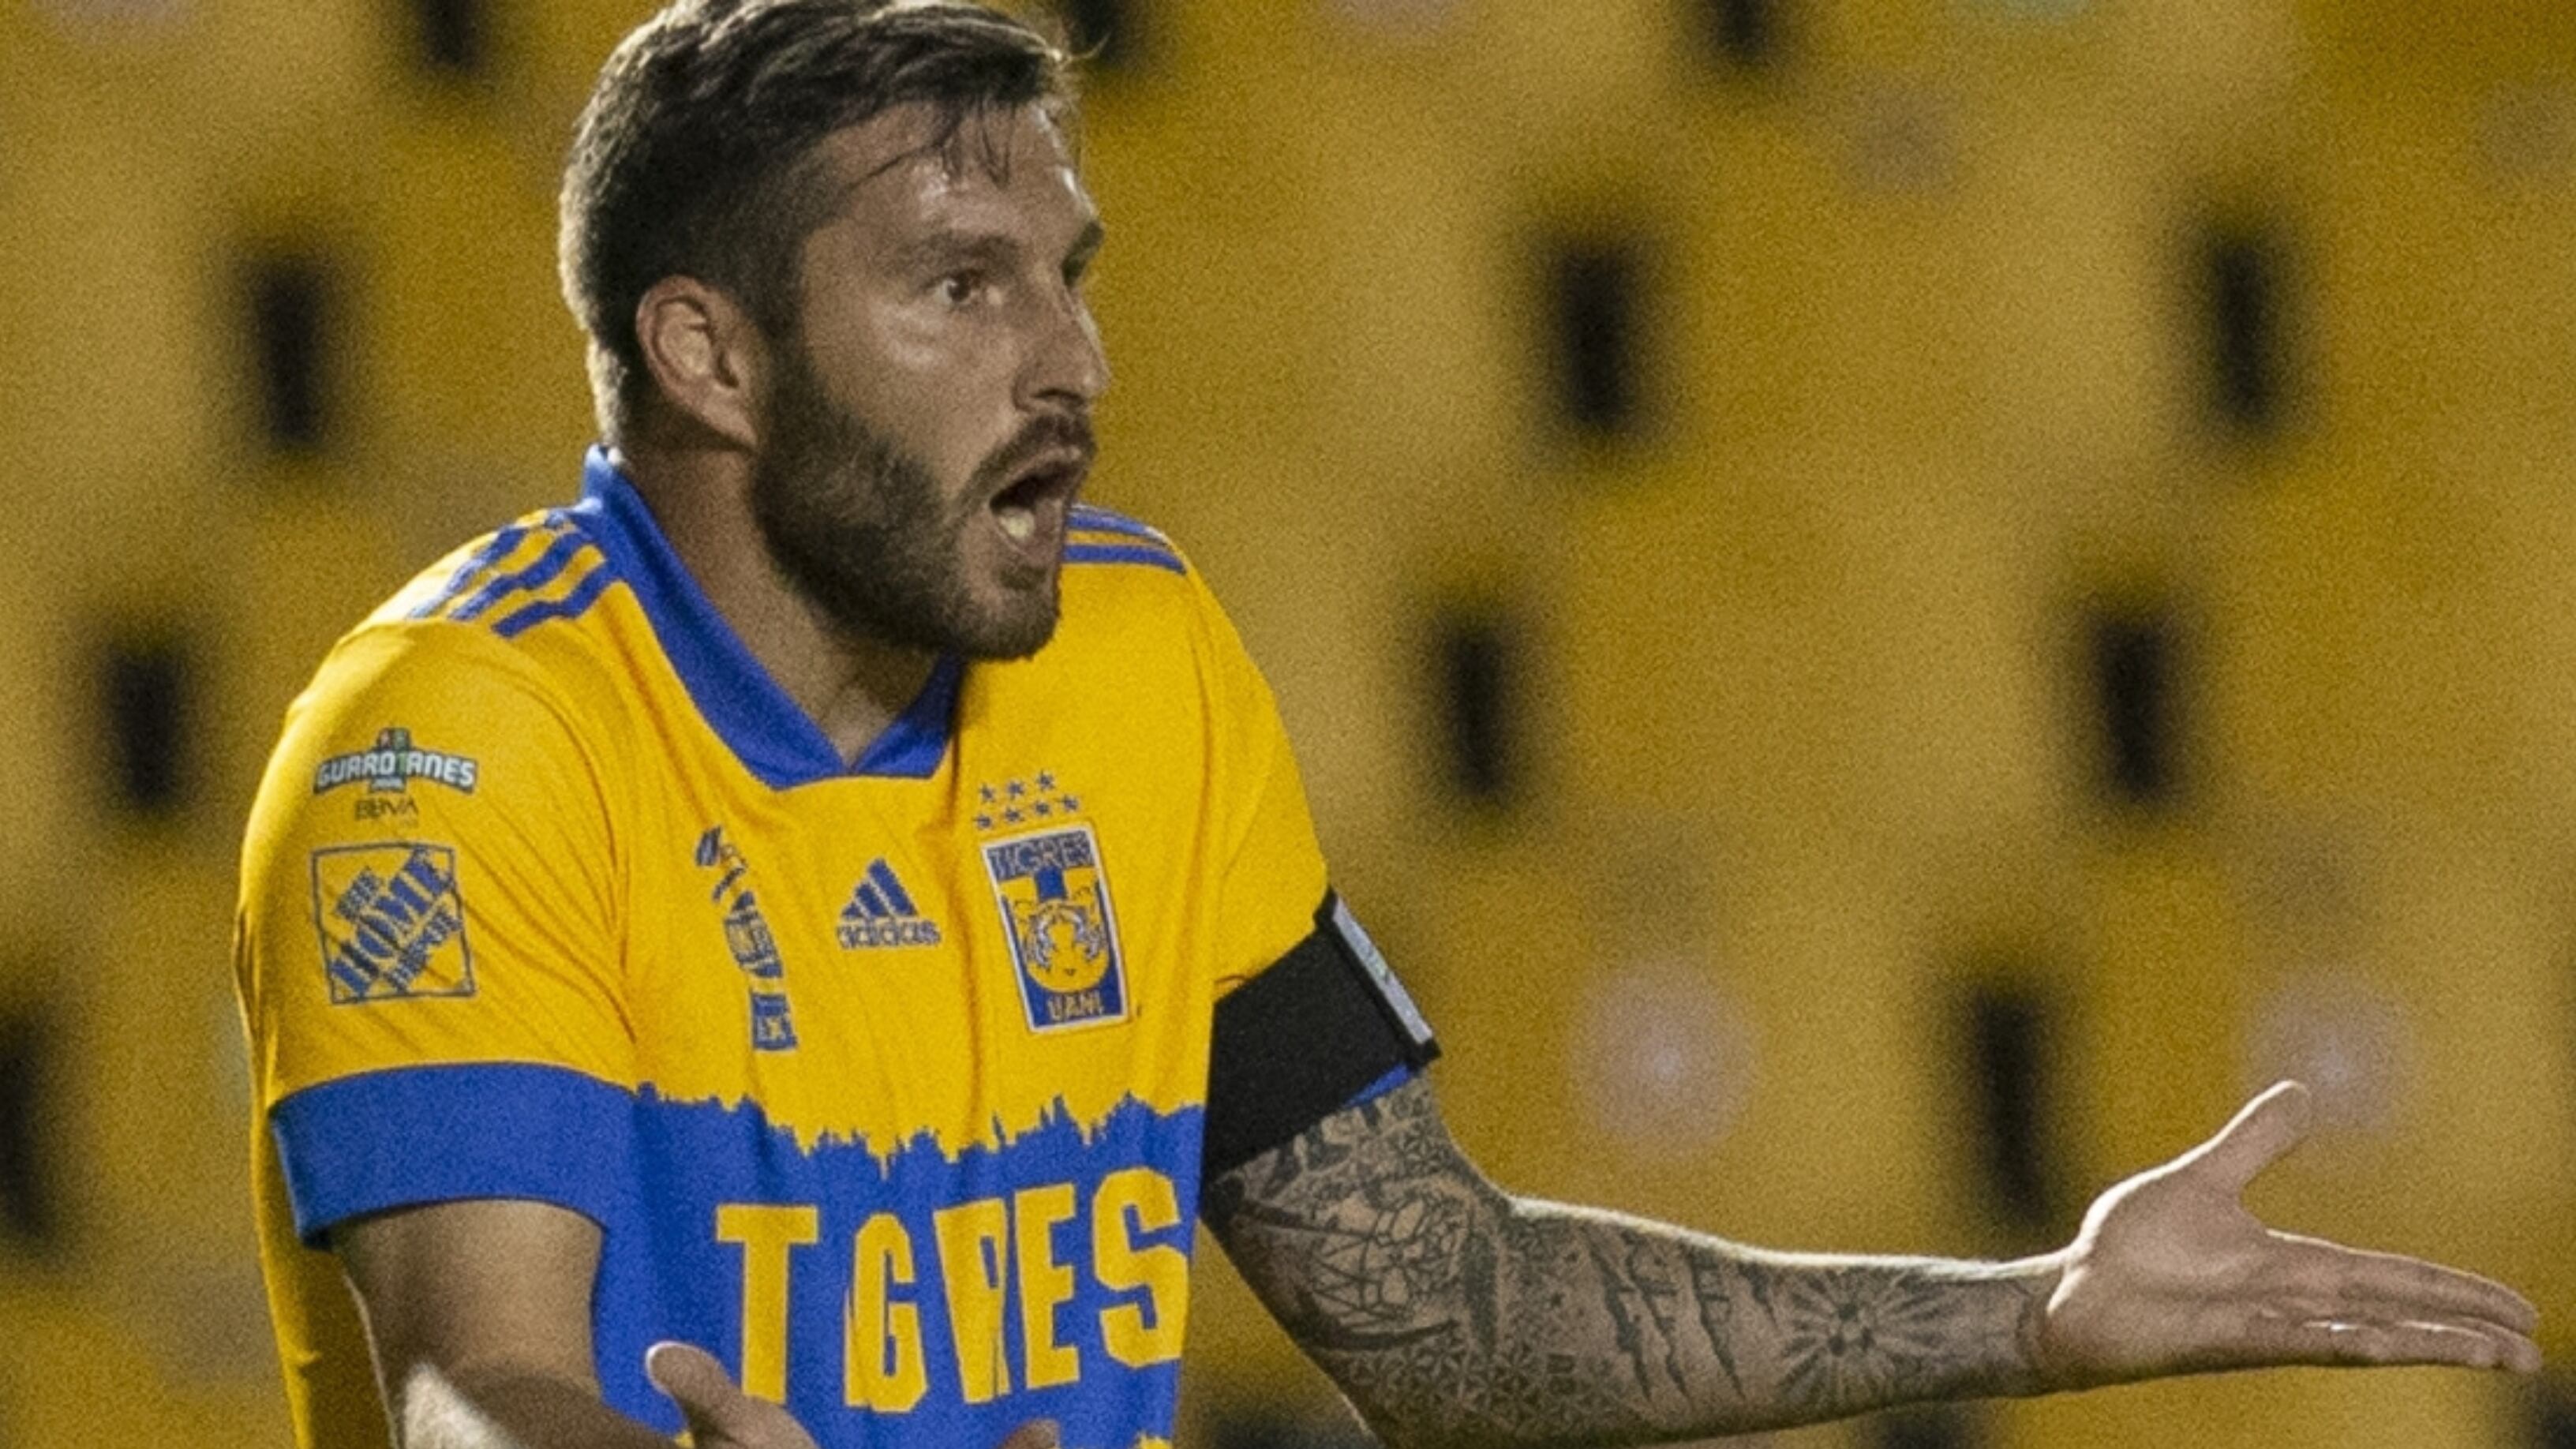 Gignac and Guzman can leave Tigres and MLS teams would already be looking for them